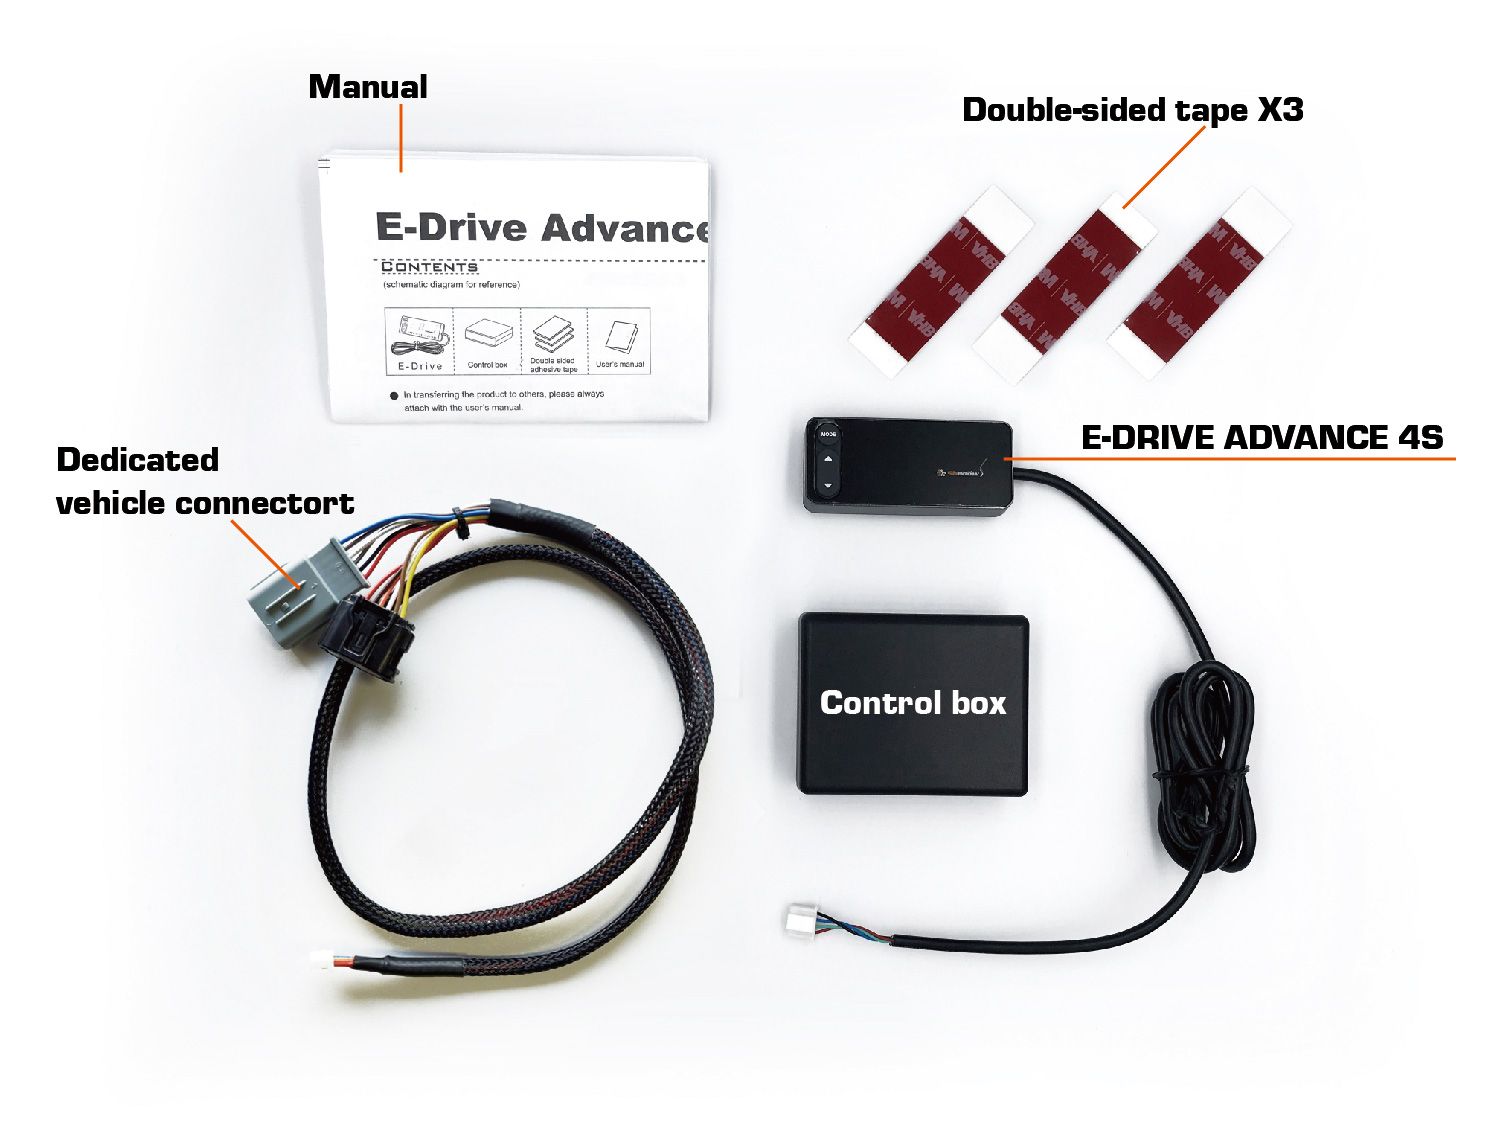 SHADOW E-DRIVE 4S ELECTRONIC THROTTLE CONTROLLER Contents